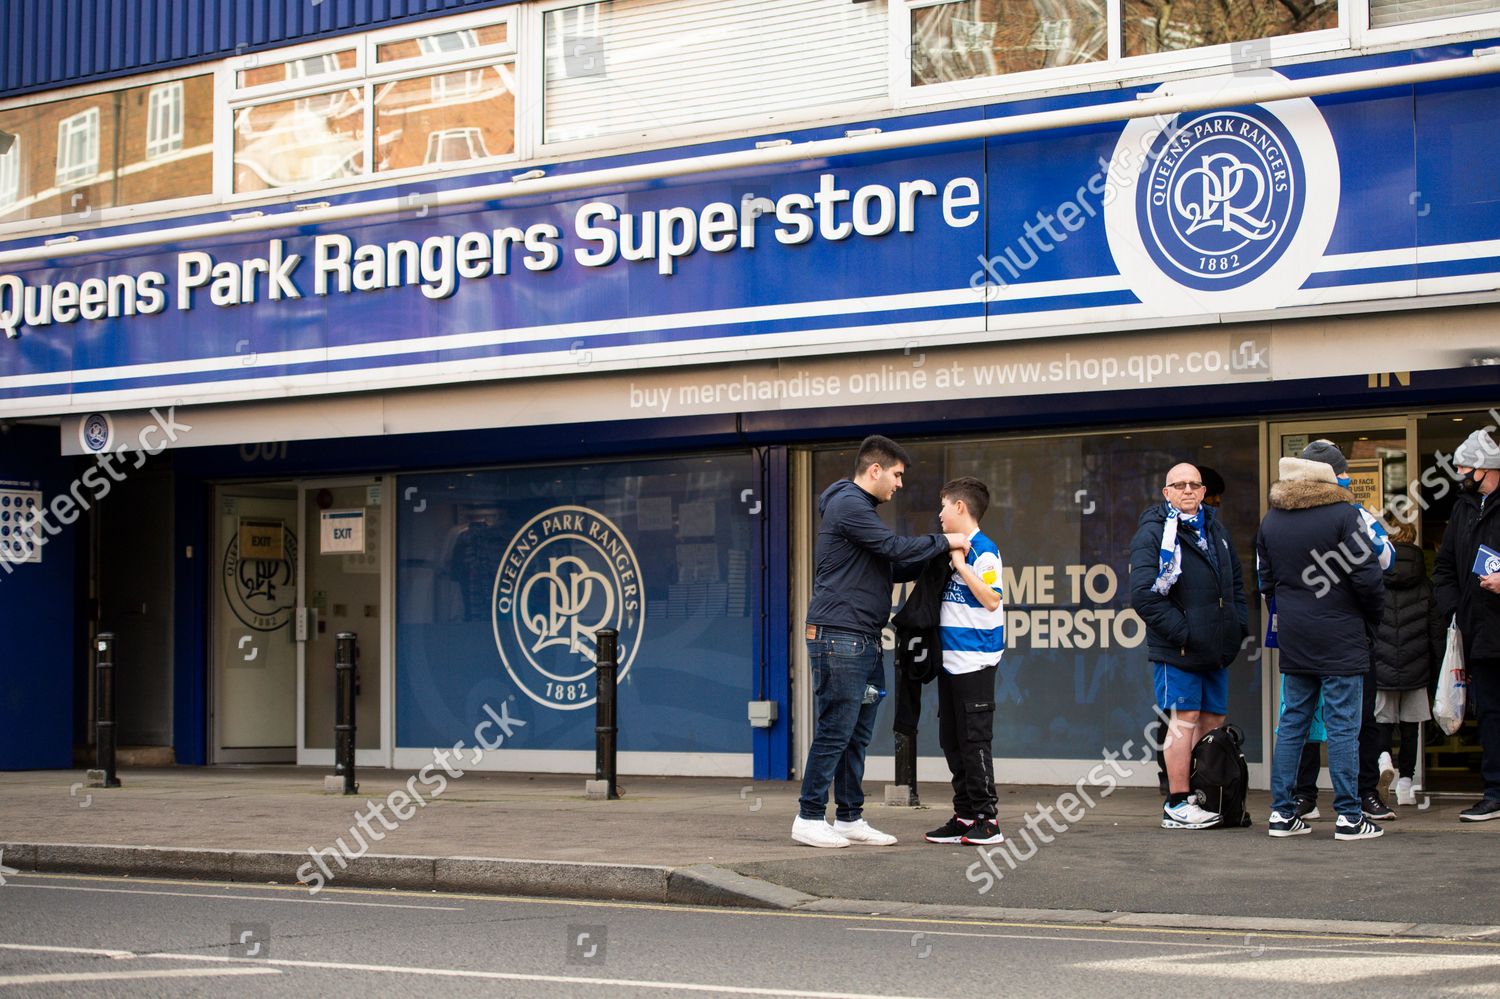 Qpr Fans Outside Club Shop Editorial Stock Photo - Stock Image |  Shutterstock